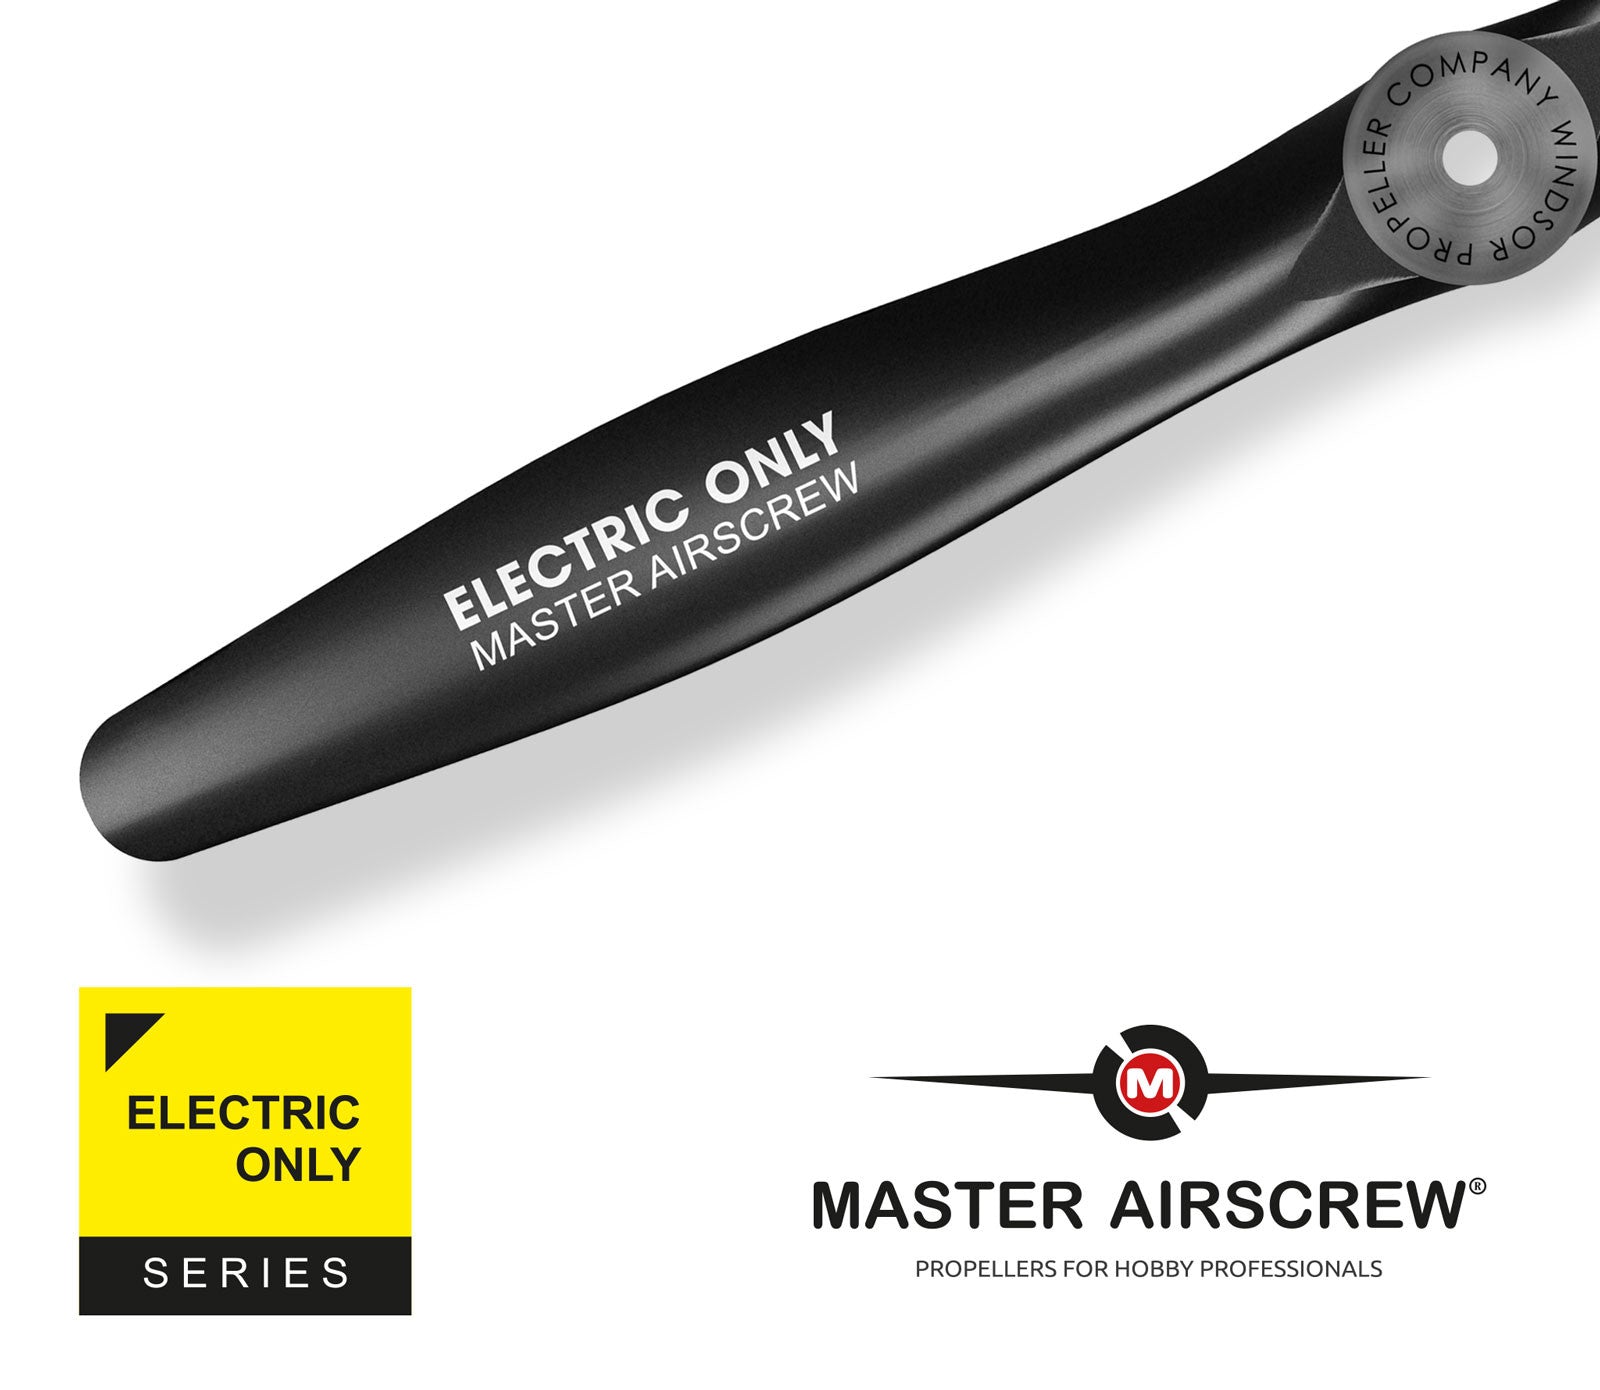 Electric Only - 6.5x4 Propeller - Master Airscrew